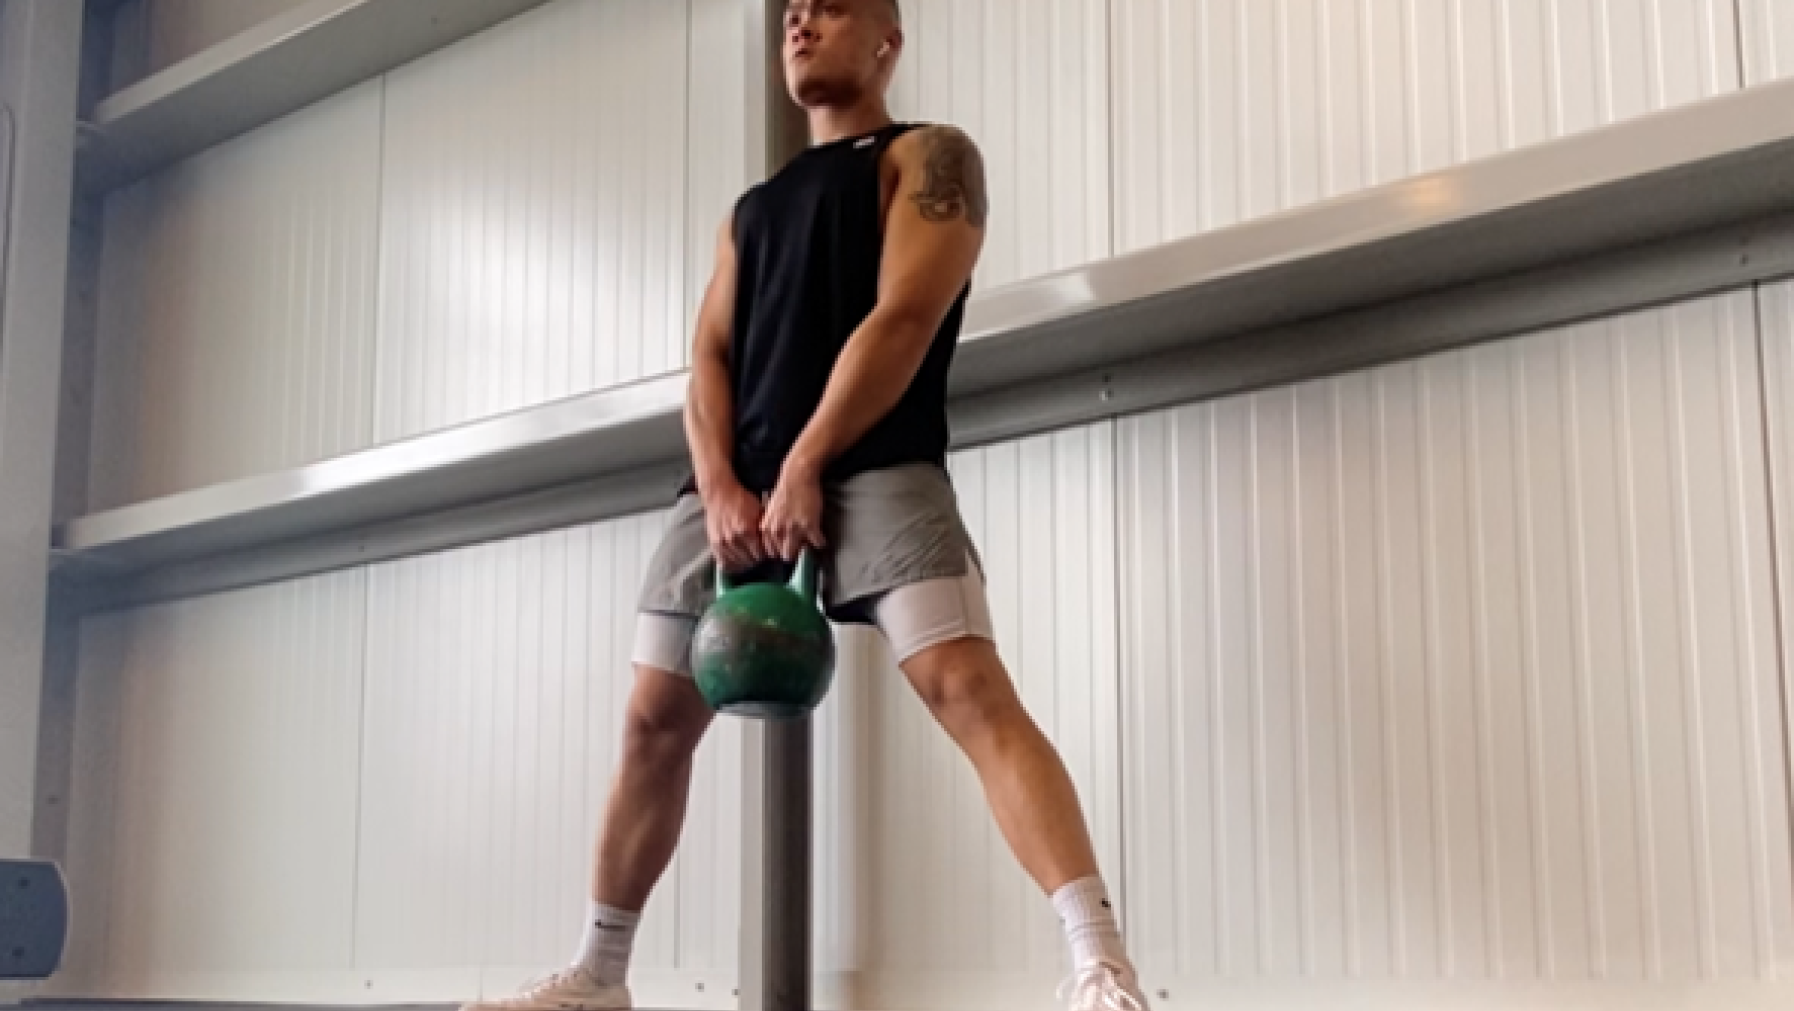 A person holding a kettlebell.